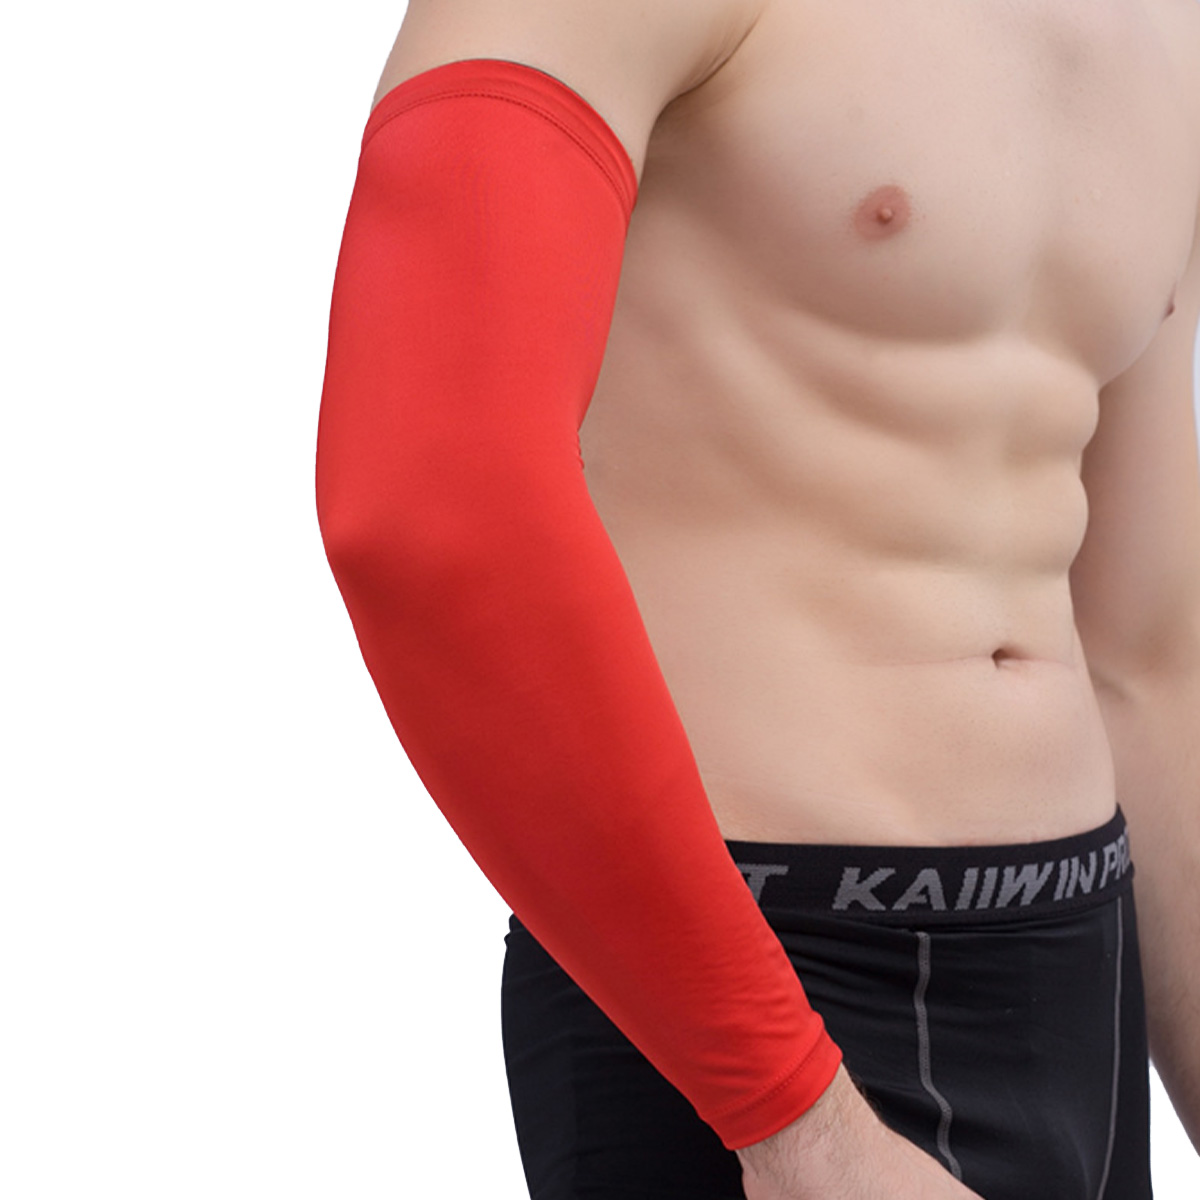 Adjustable Polyester Arm Sleeves Elbow Support